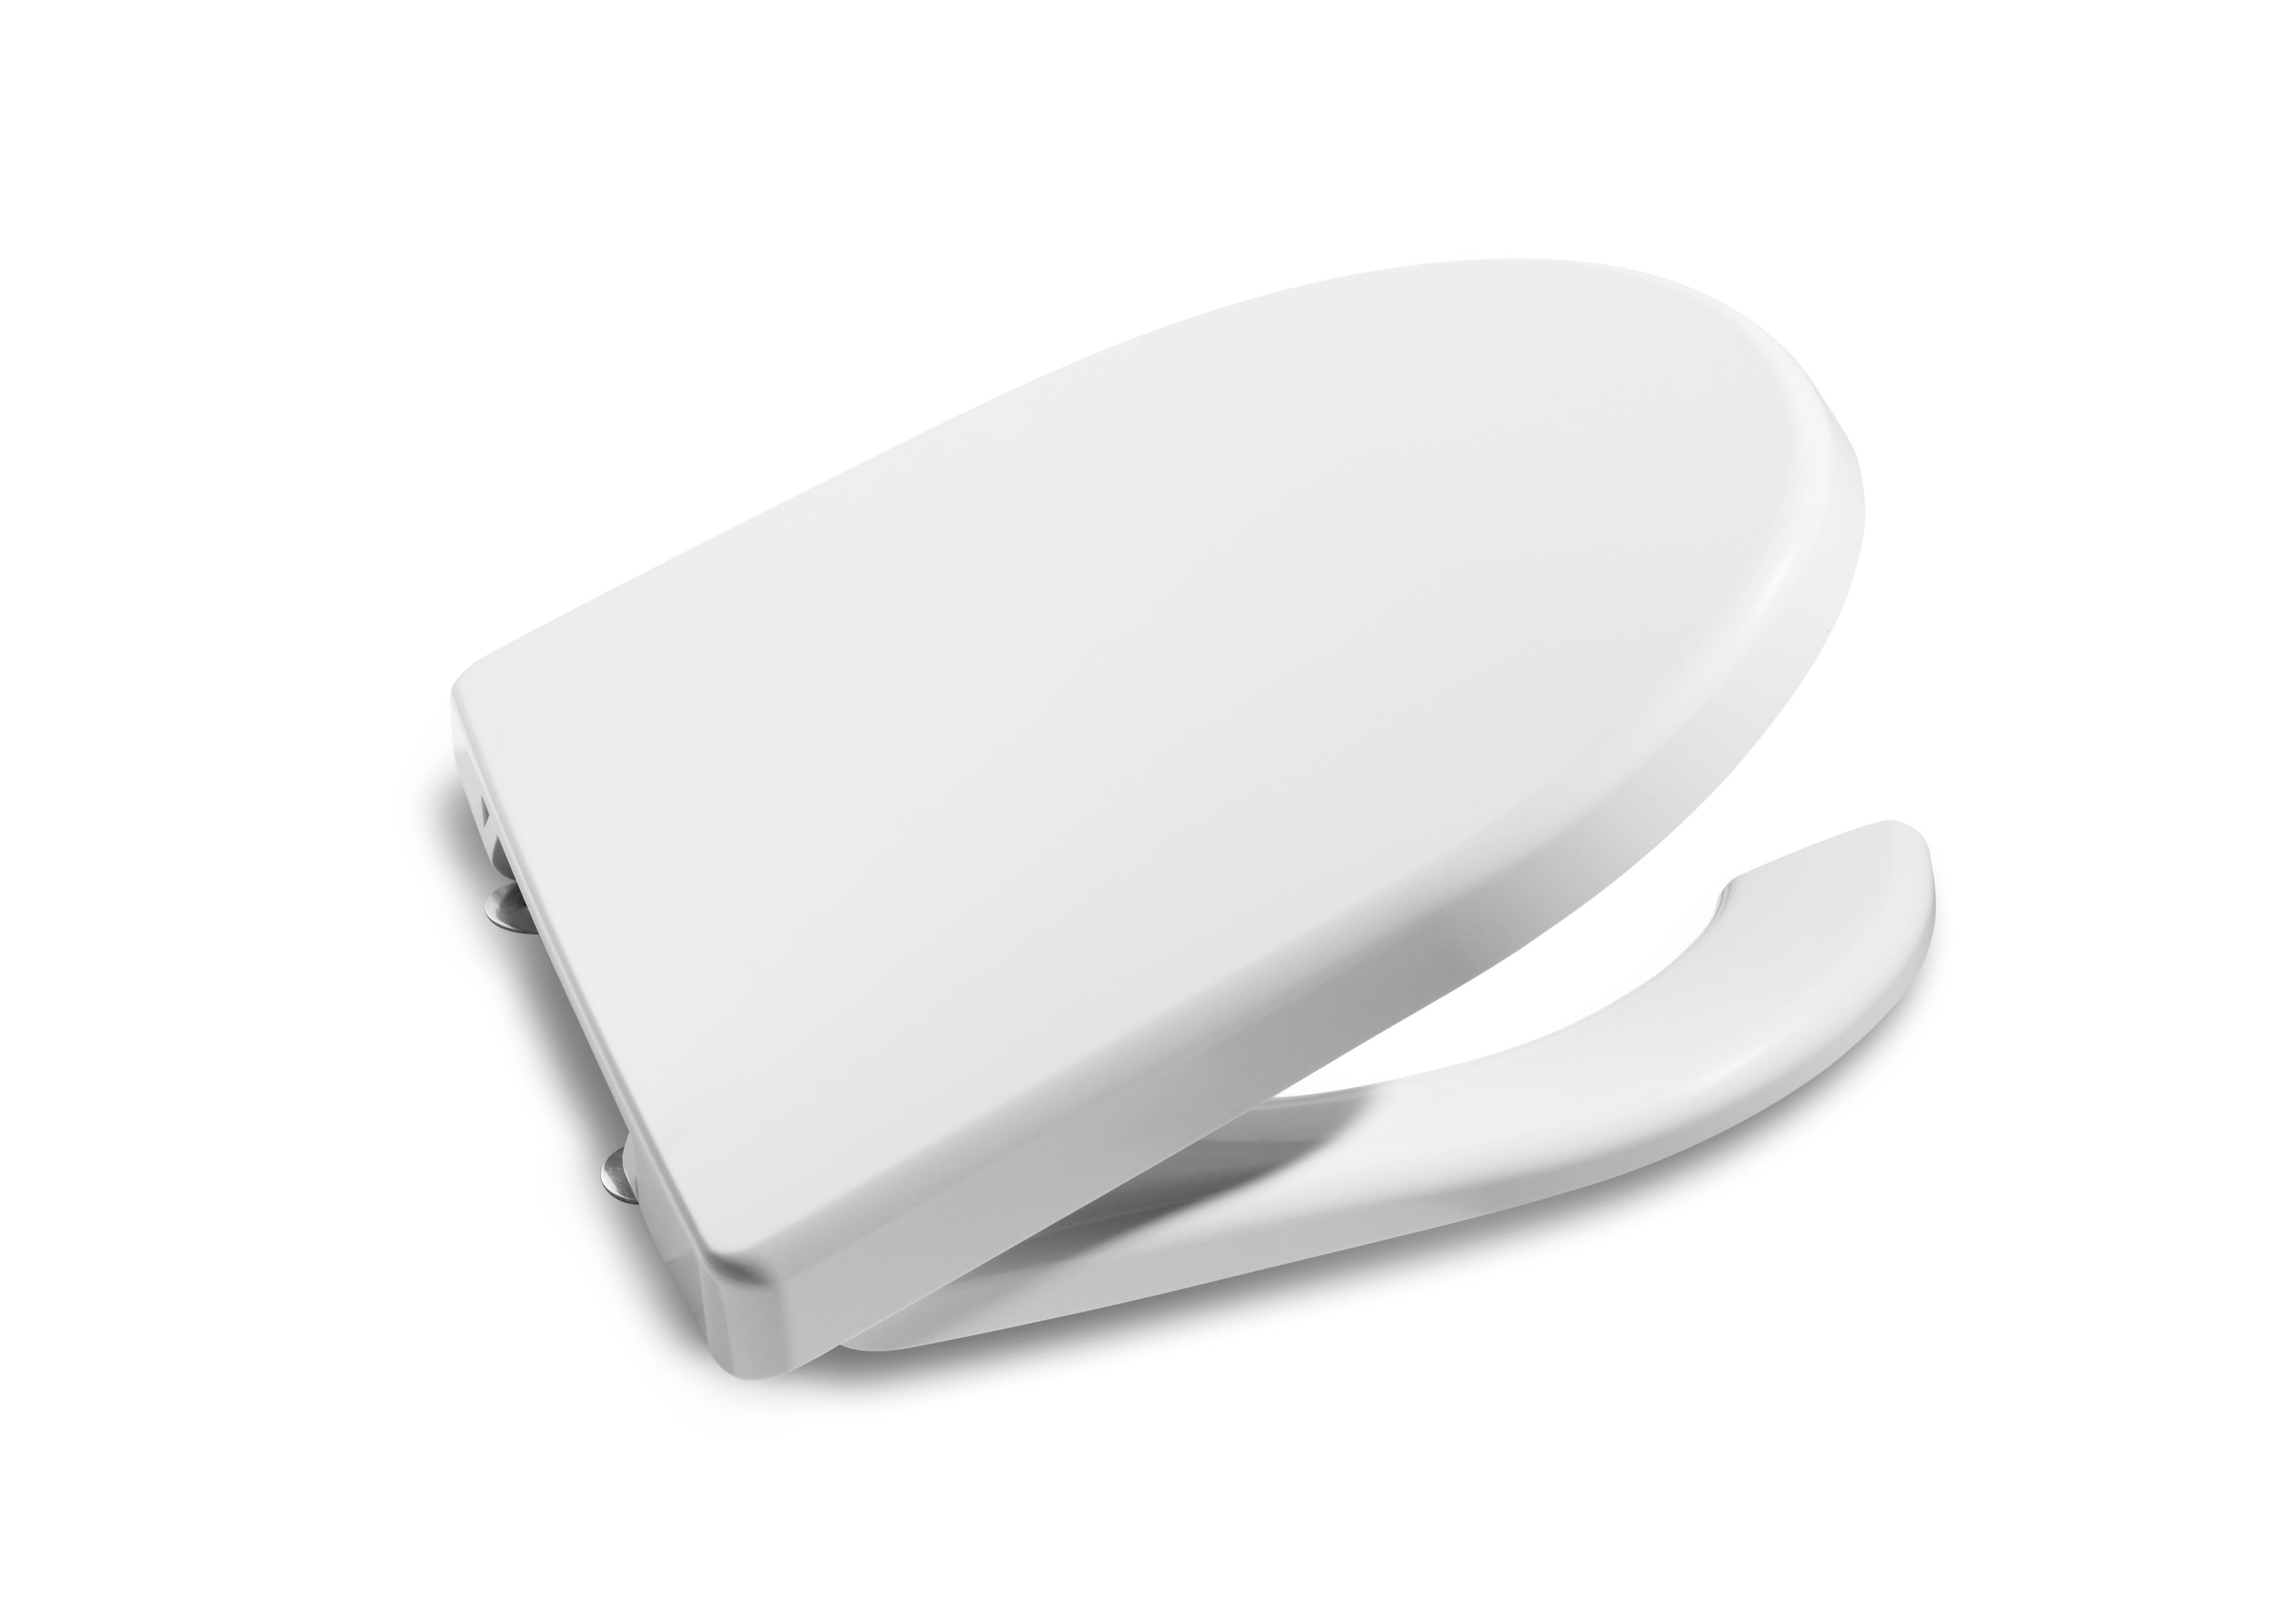 ROUND - Soft-closing SUPRALIT® toilet seat and cover